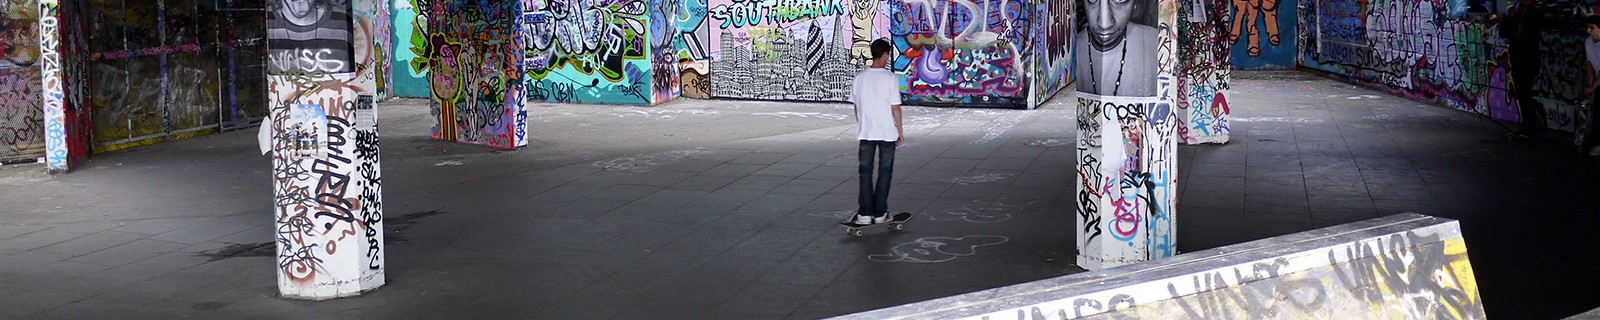 Skateboarders on the South Bank.